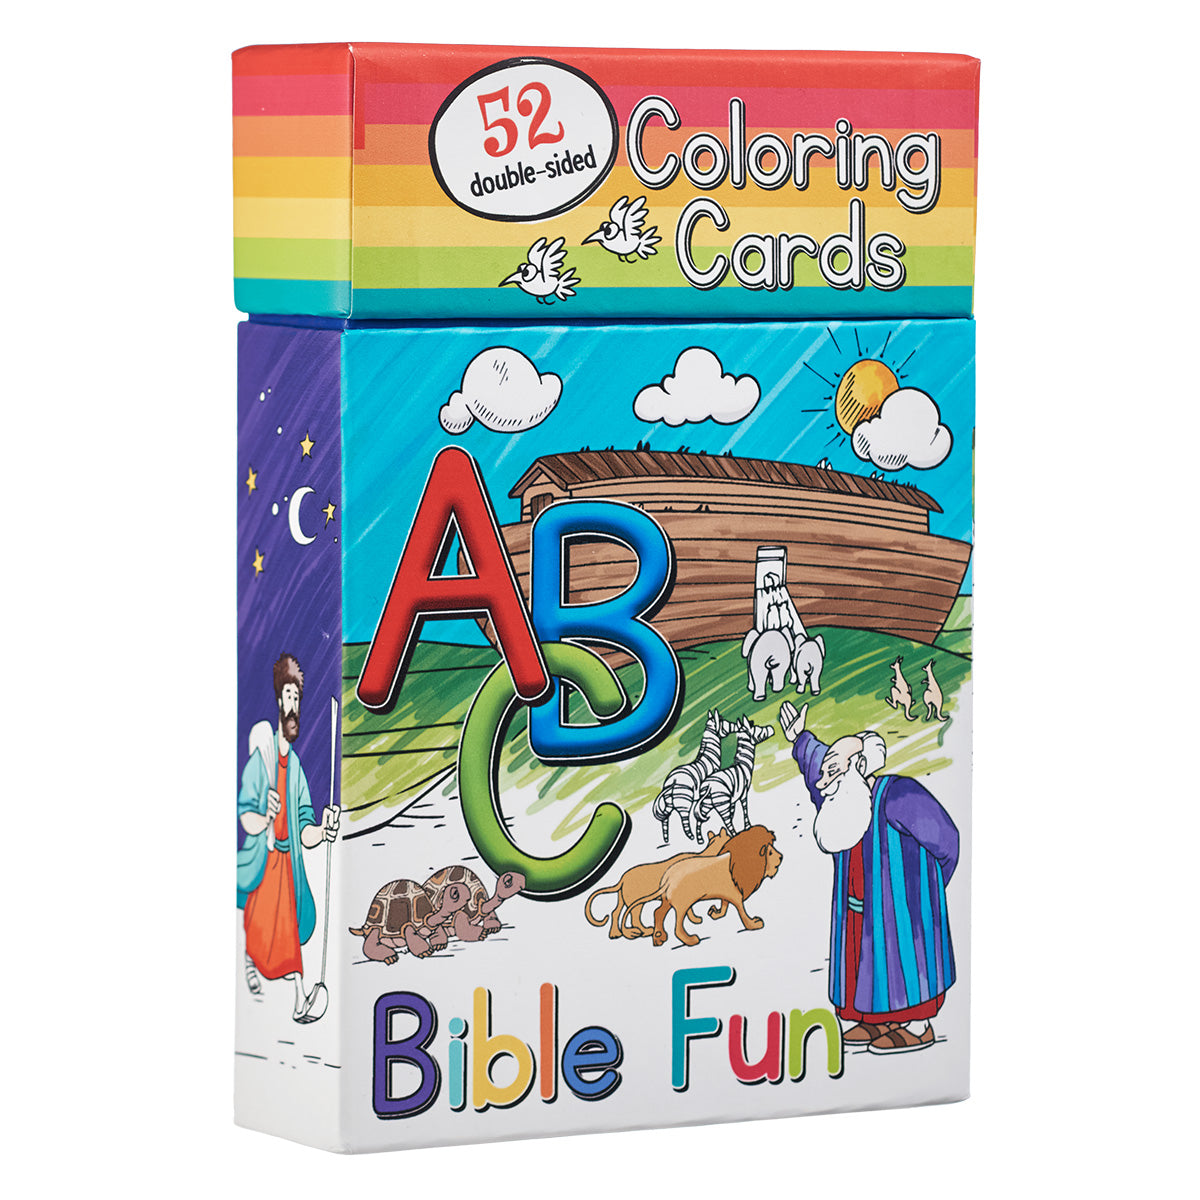 Image of Coloring Cards ABC Bible Fun (Box of 52) other